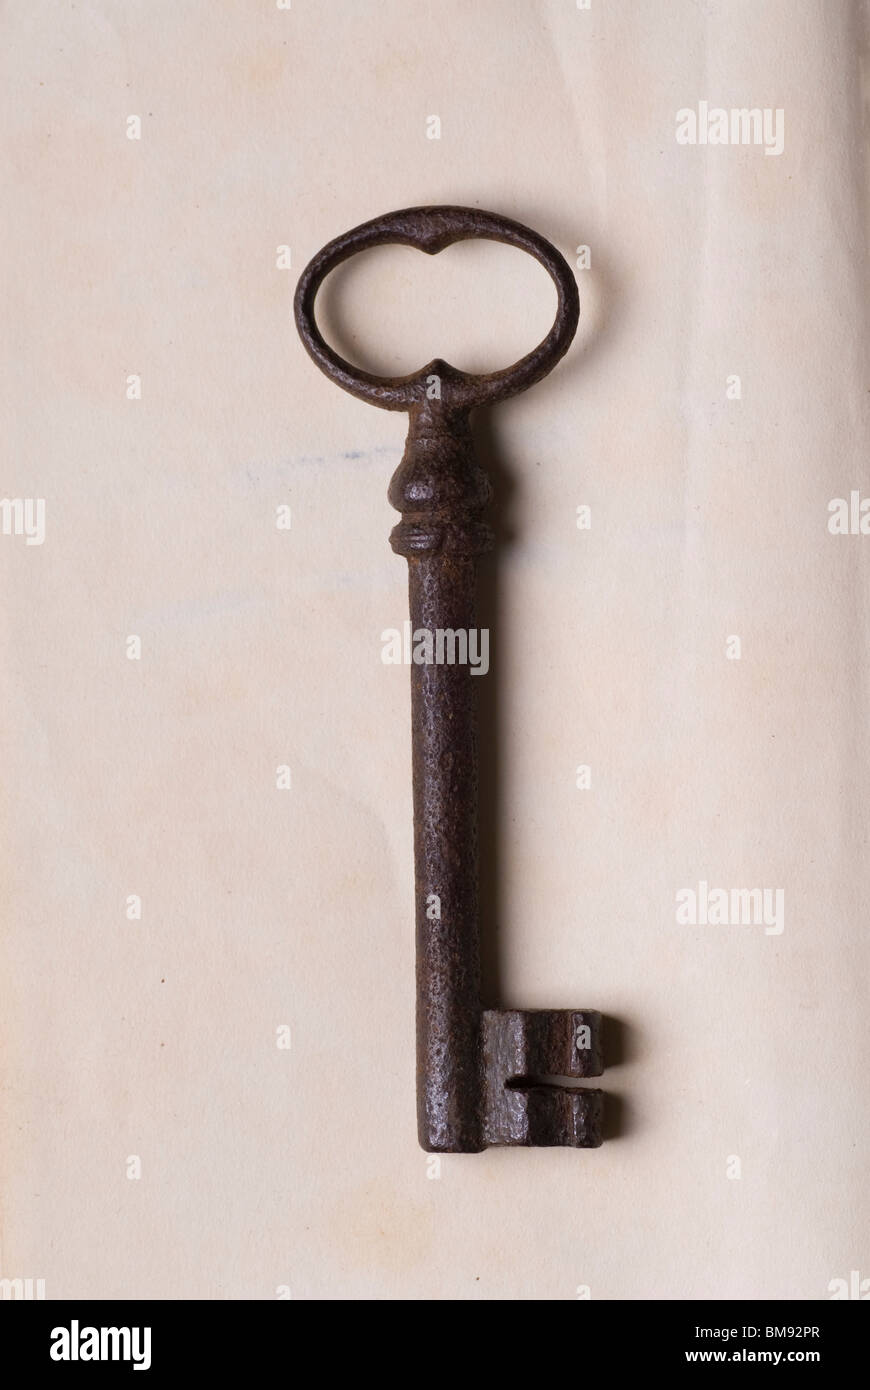 Old rusty metal house key Banque D'Images